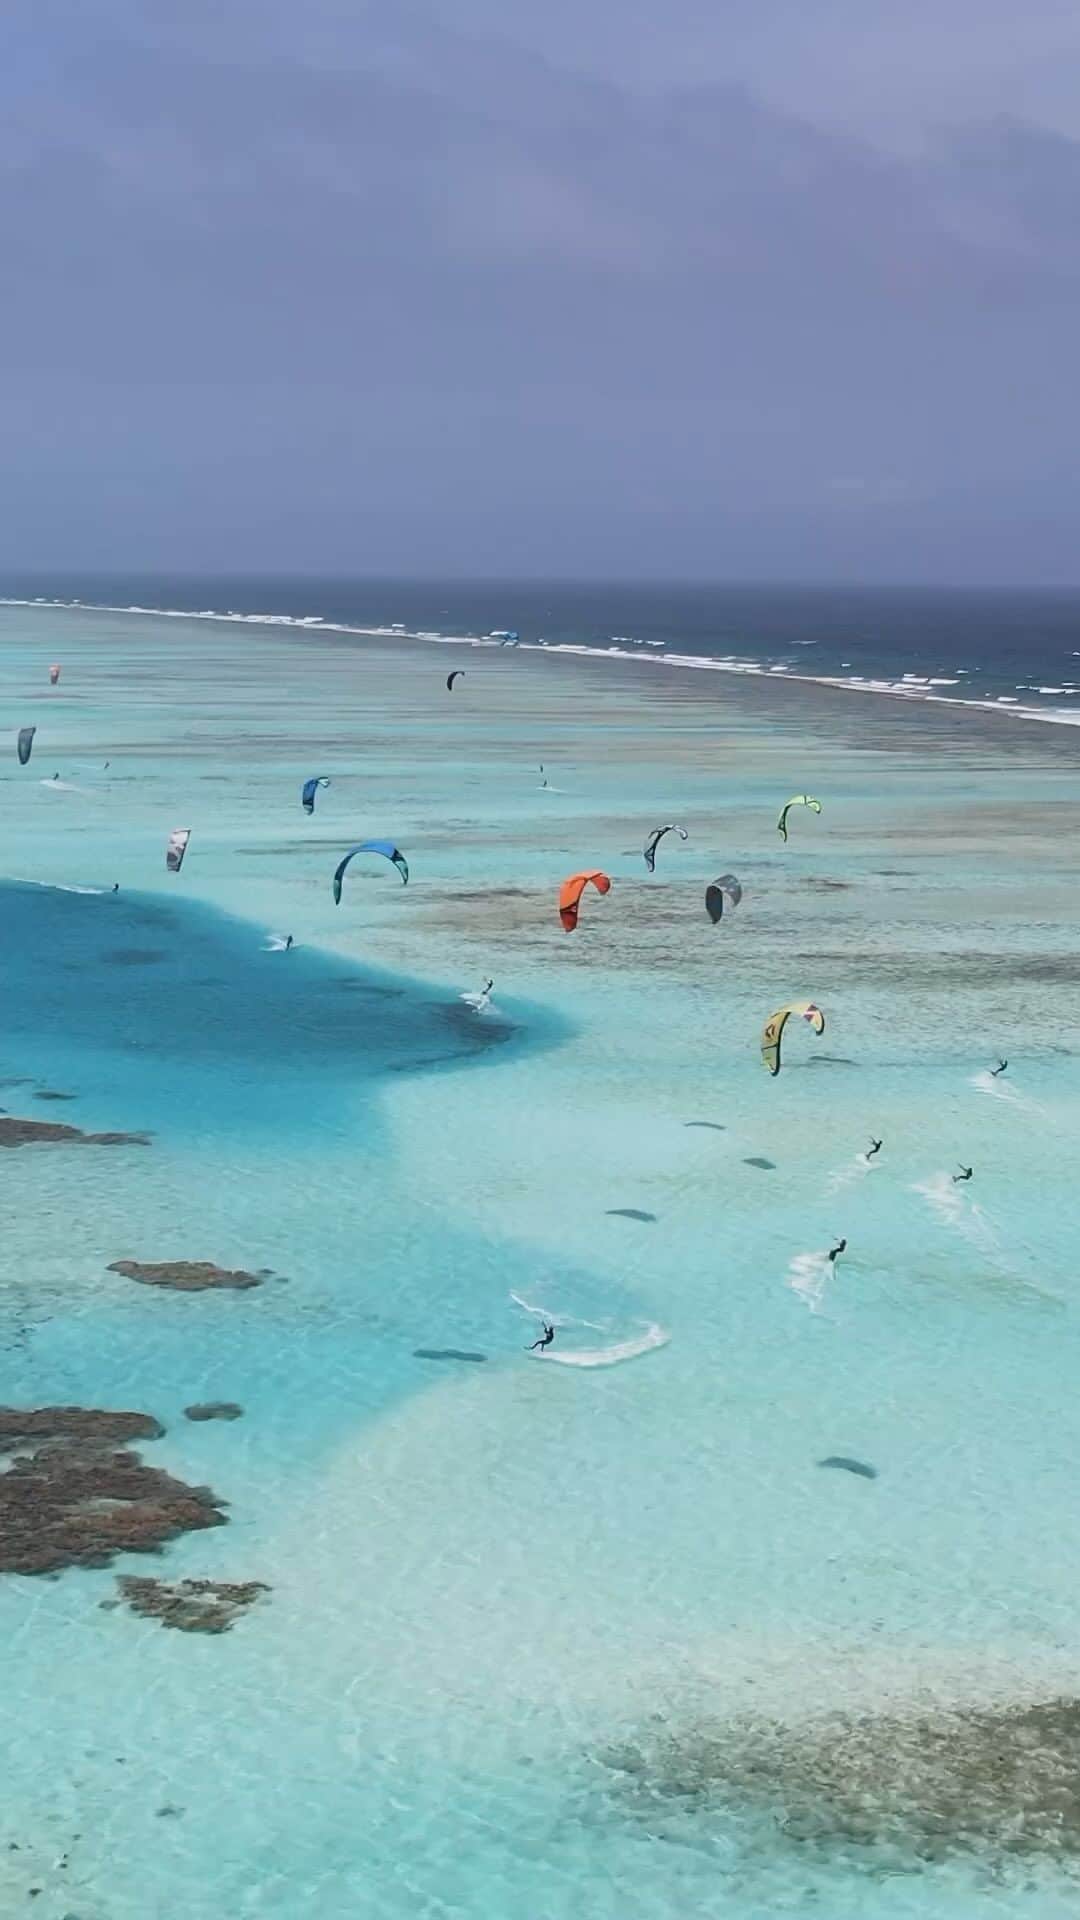 PicLab™ Sayingsのインスタグラム：「Just coastin’ 🏄‍♂️ 💦 How cool would it be to kite surf over this aquamarine water?!   📌 Los Roques Venezuela 🇻🇪  🎥 @fukajaz」